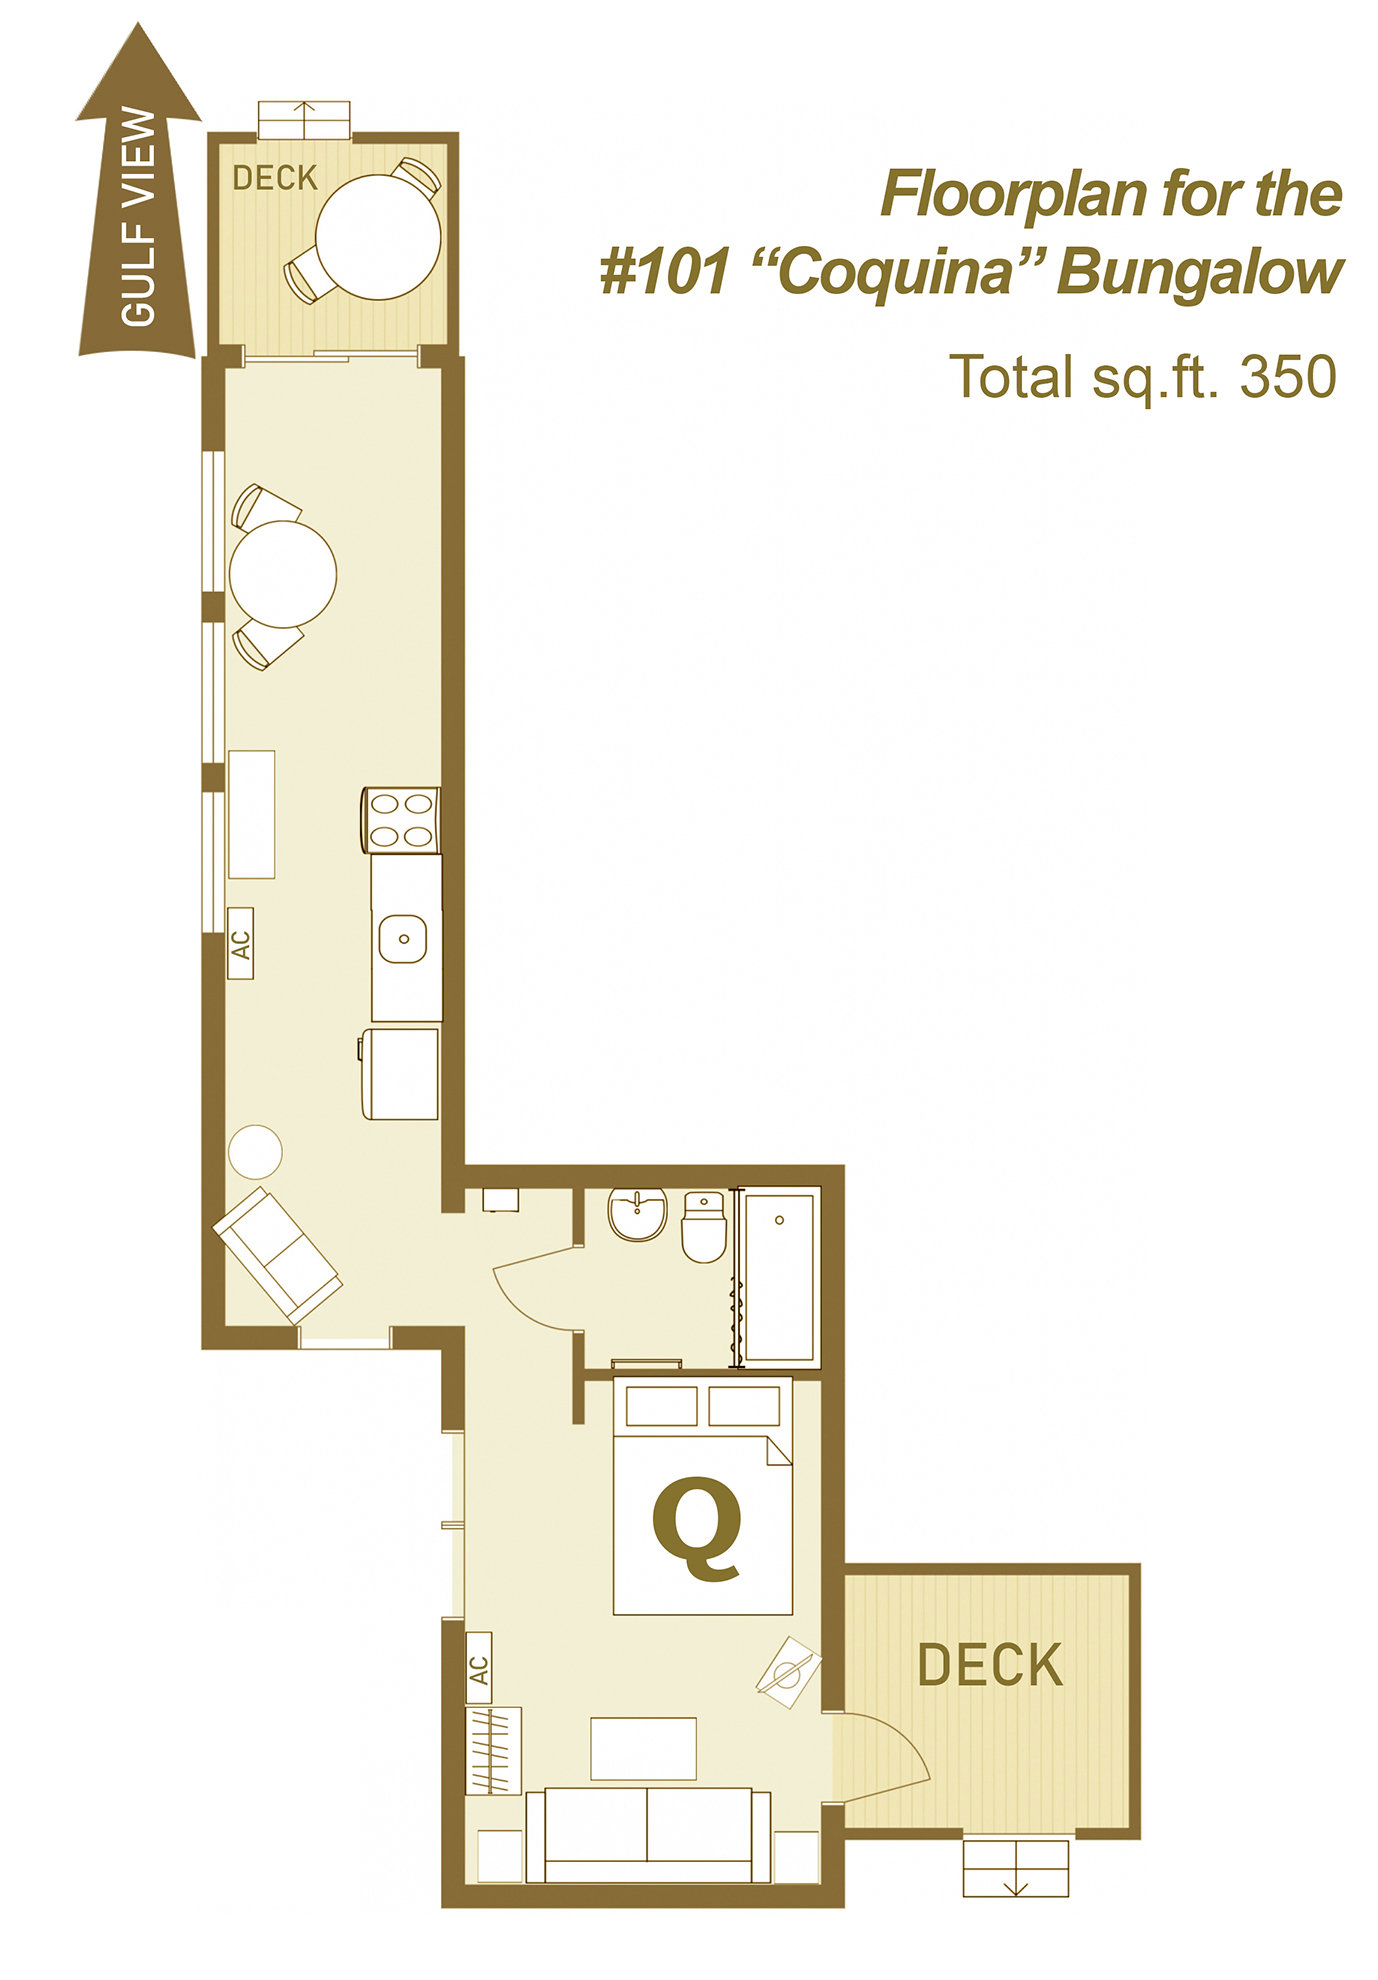 Floor plan for Coquina Bungalow #101 Bungalow